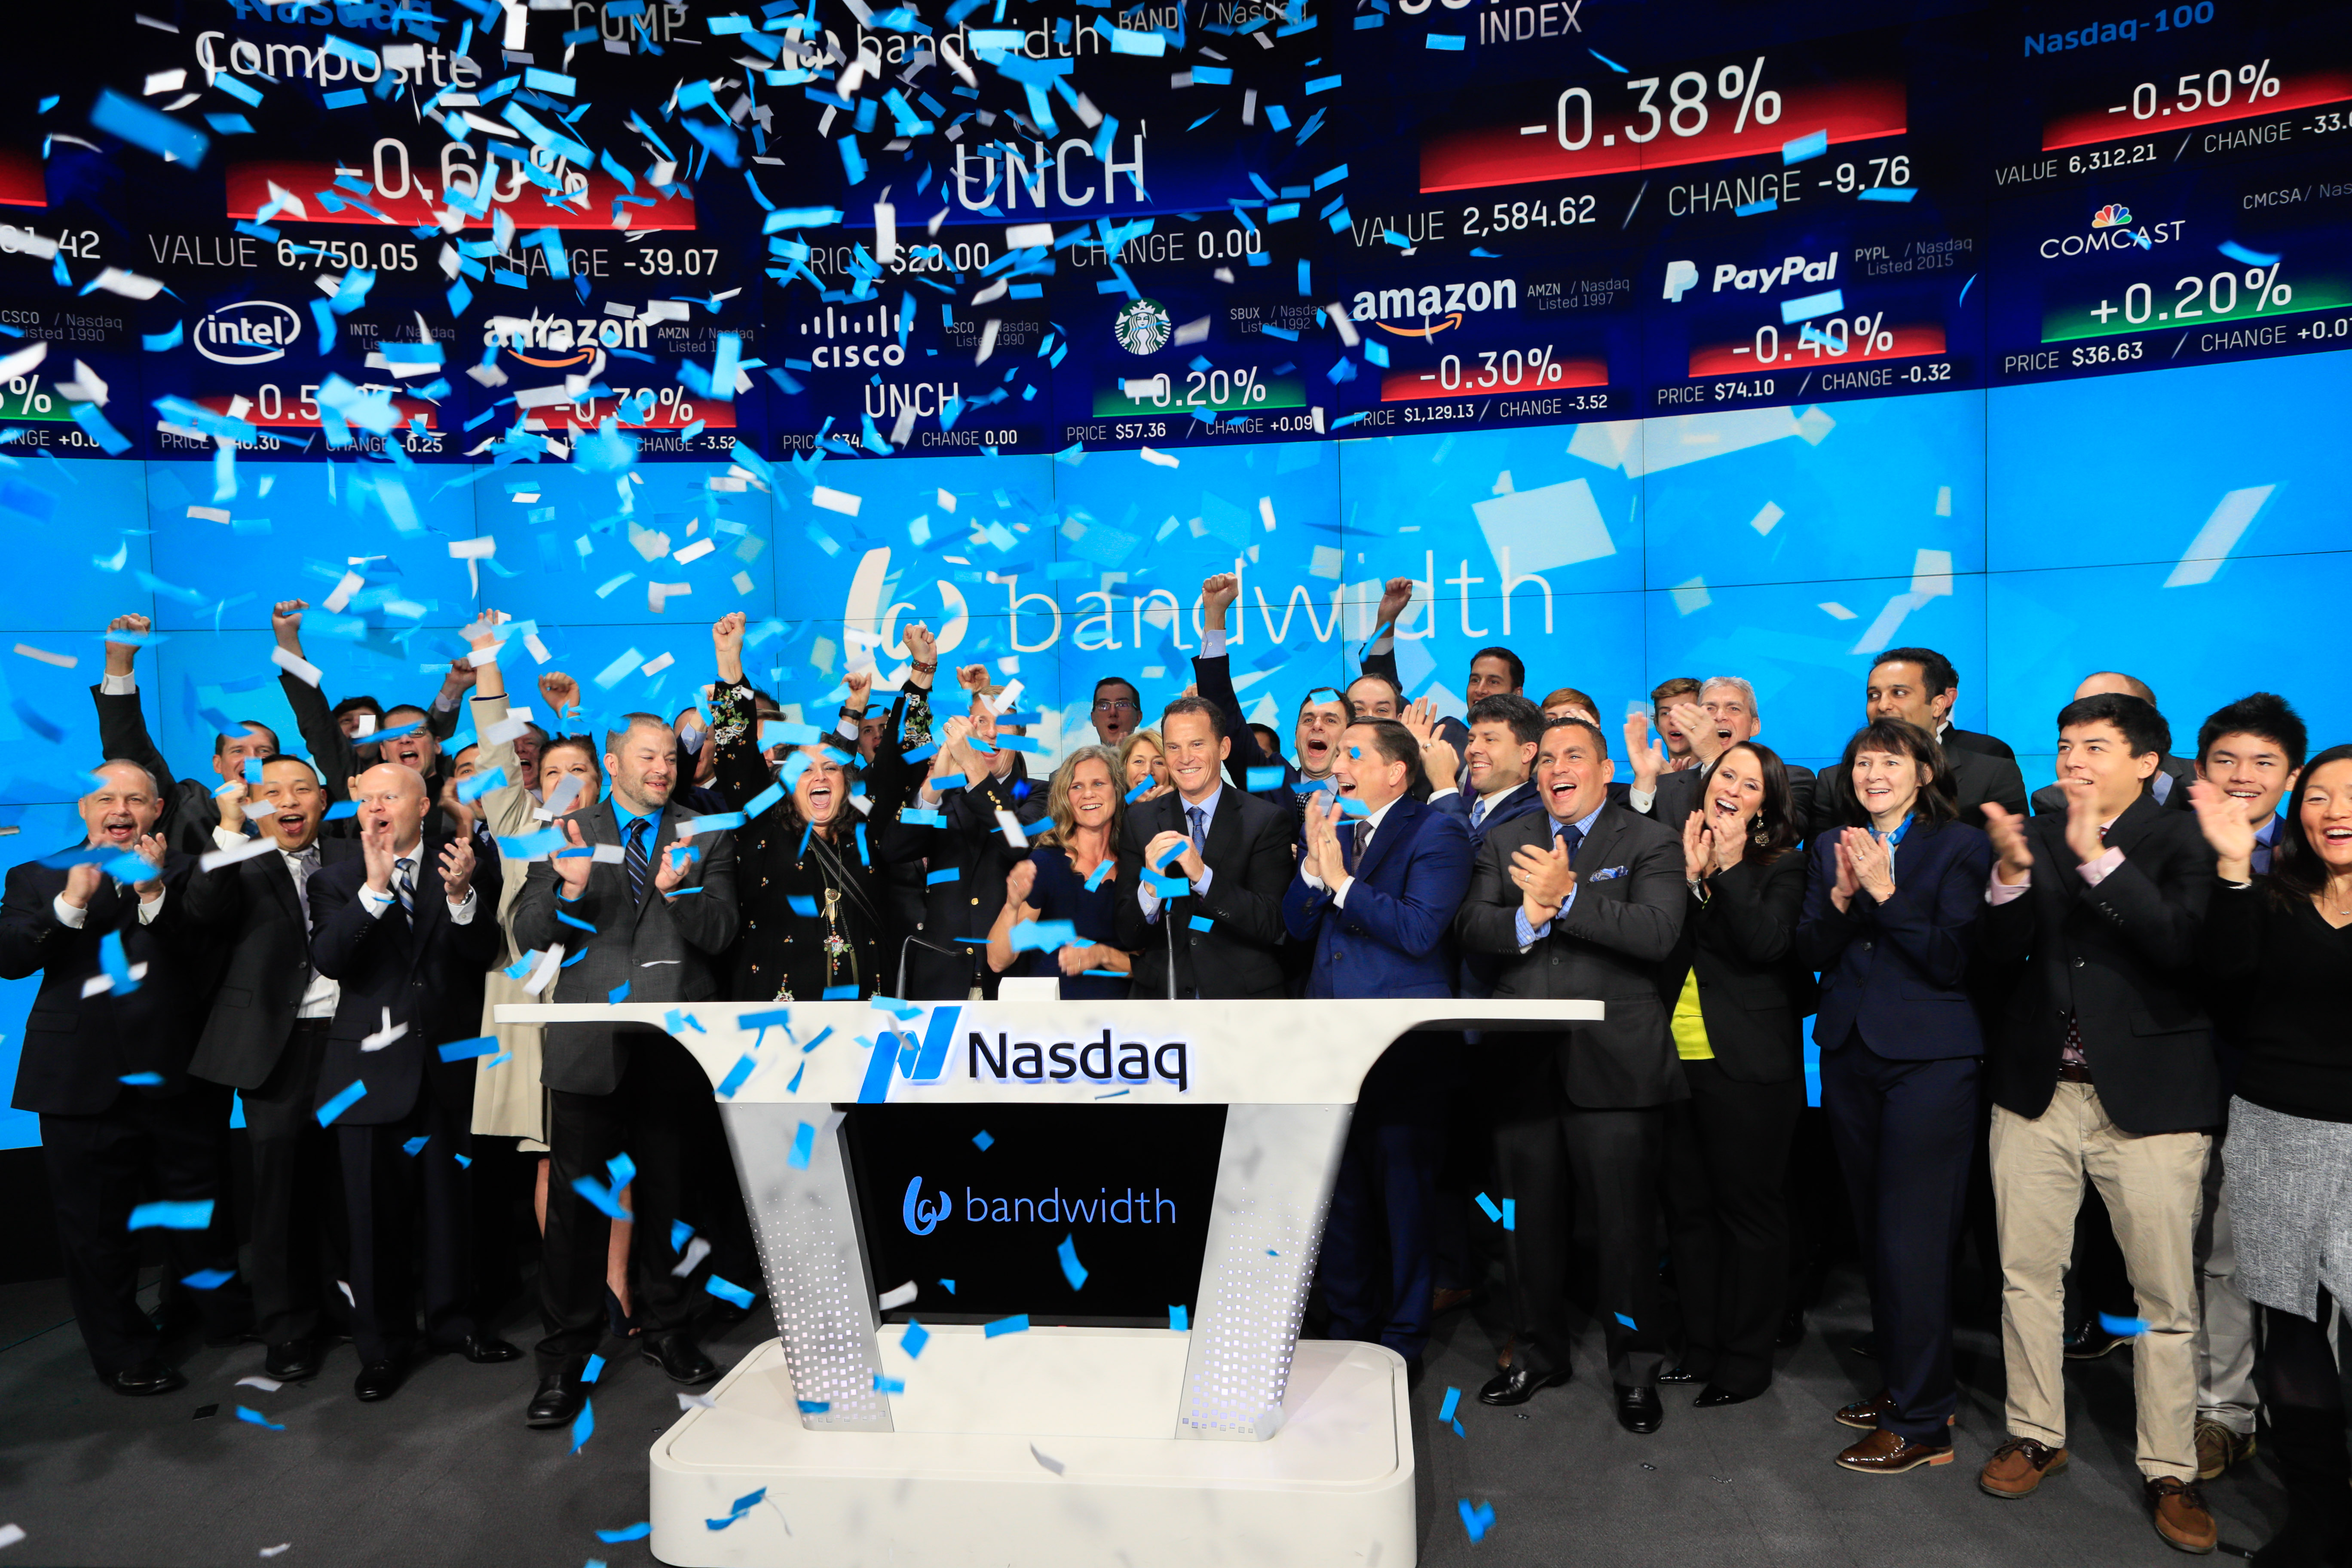 Bandwidth Inc. Rings The Nasdaq Stock Market Opening Bell in Celebration of Its IPO